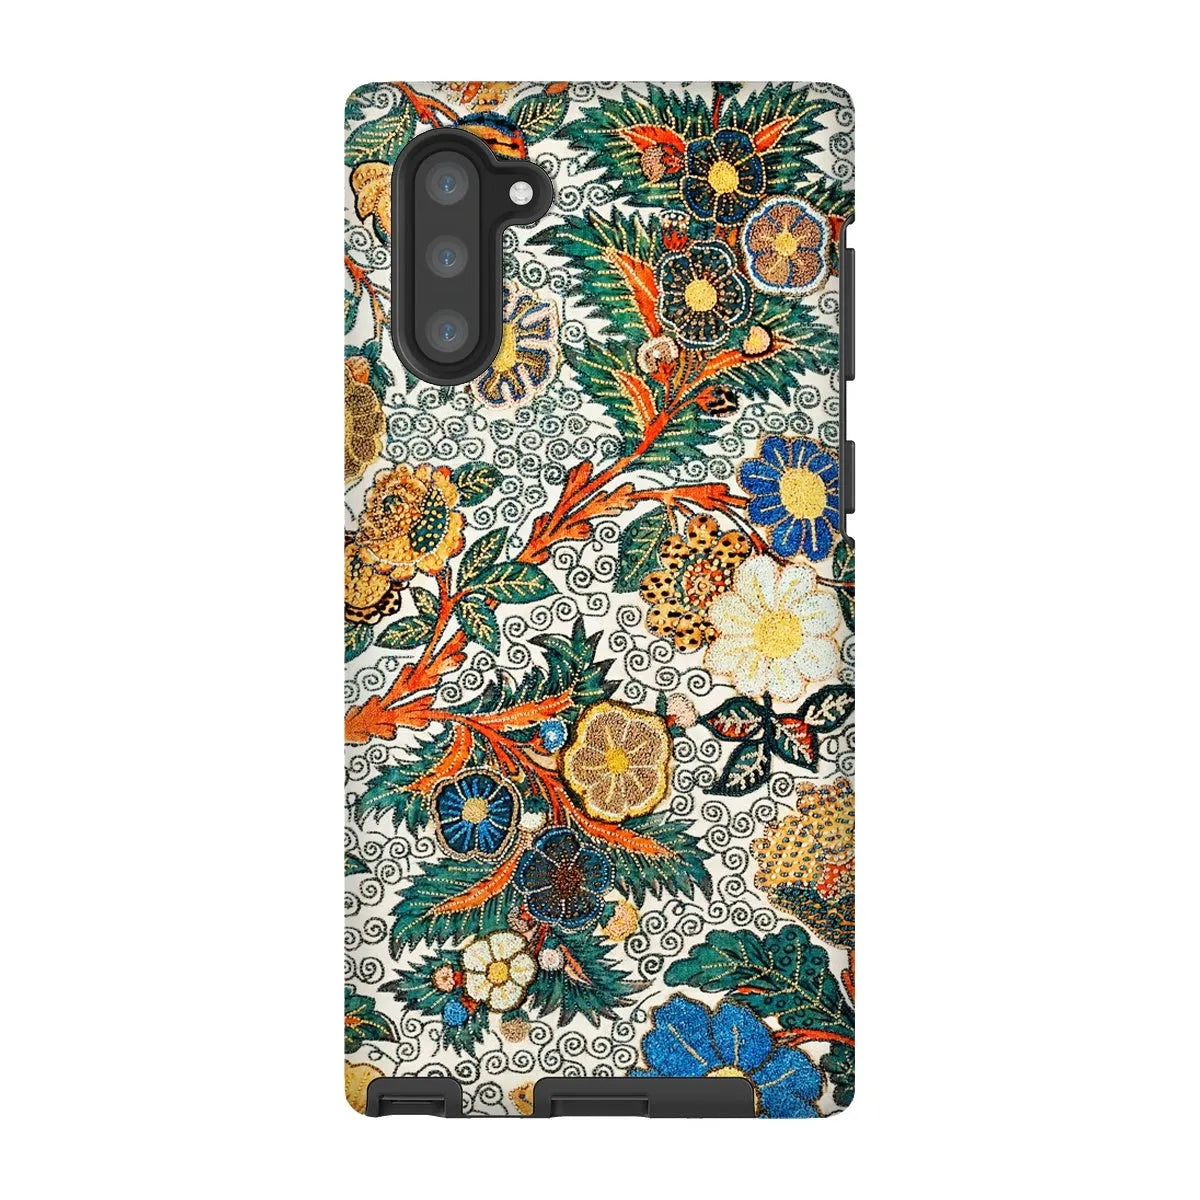 Blossomewhere Japanese Tapestry Art Phone Case - Samsung Galaxy Note 10 / Matte - Mobile Phone Cases - Aesthetic Art